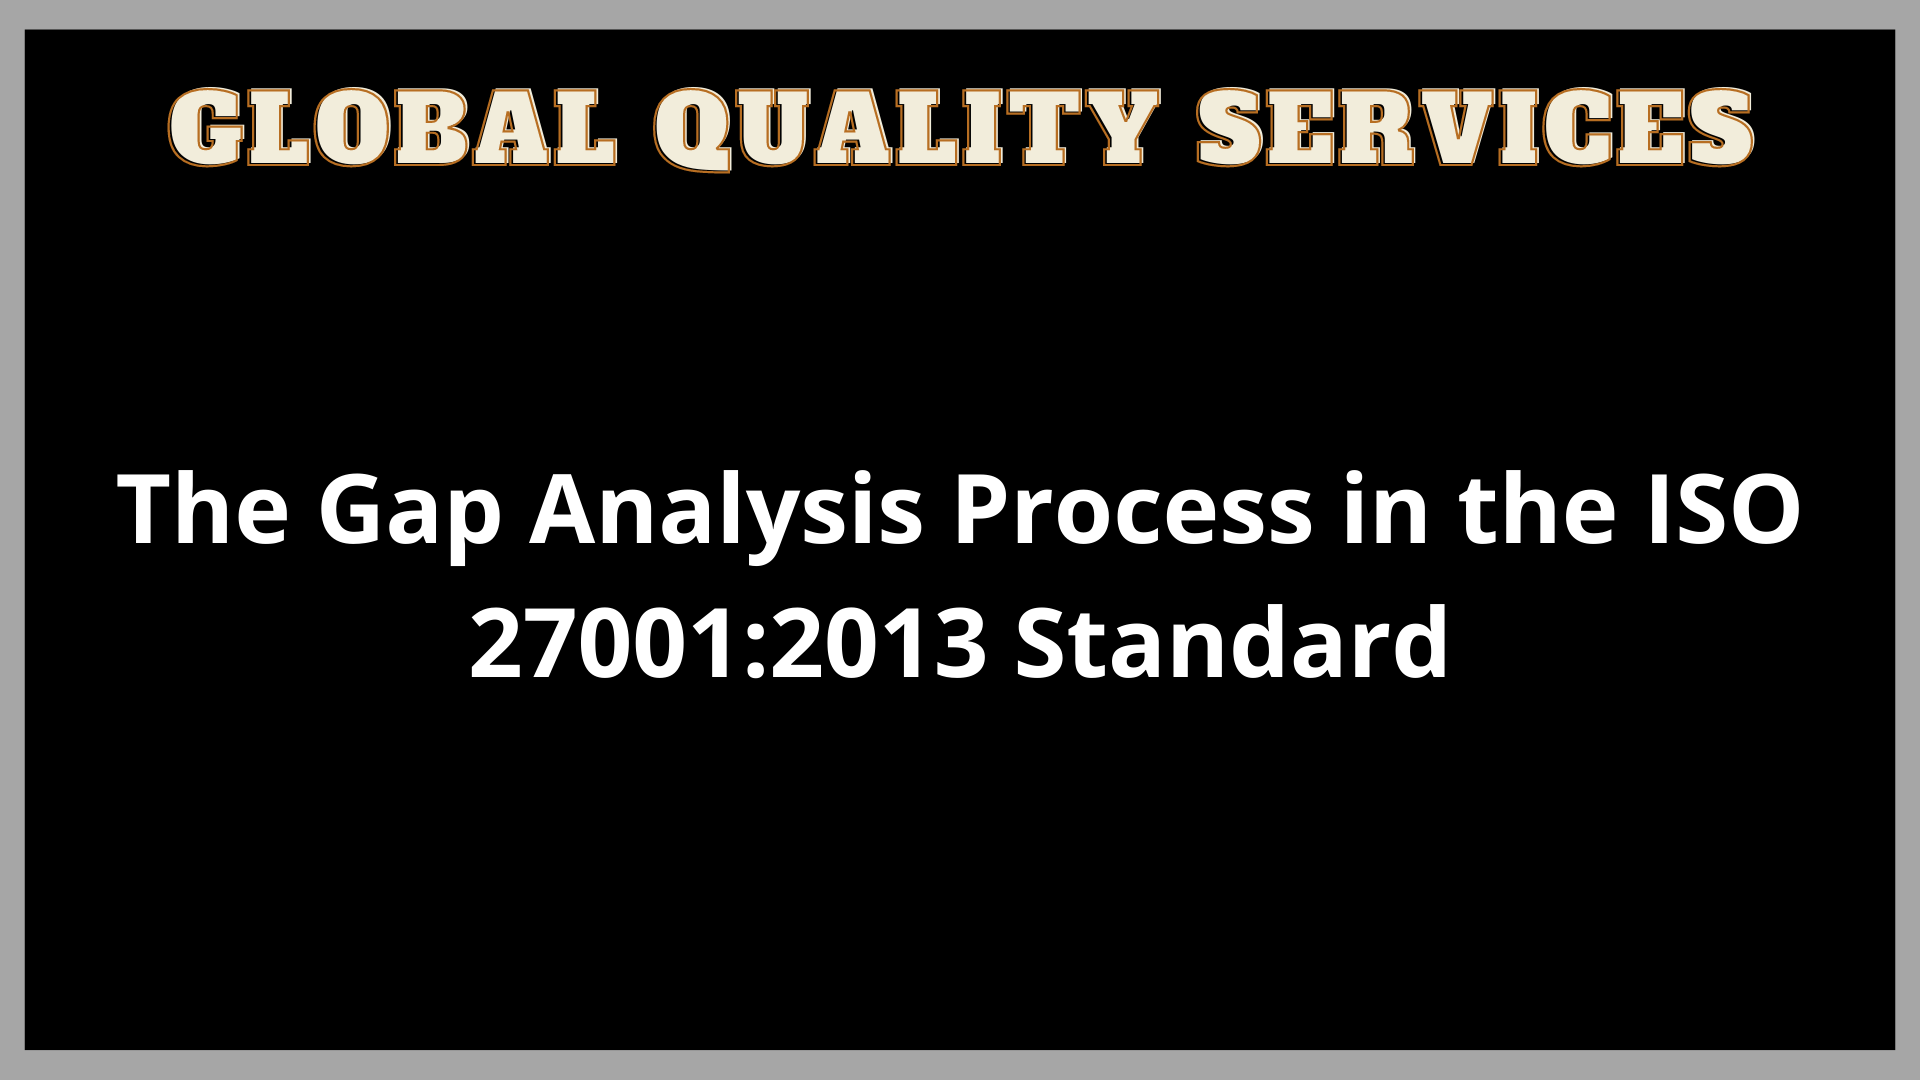 The Gap Analysis Process in the ISO 27001:2013 Standard